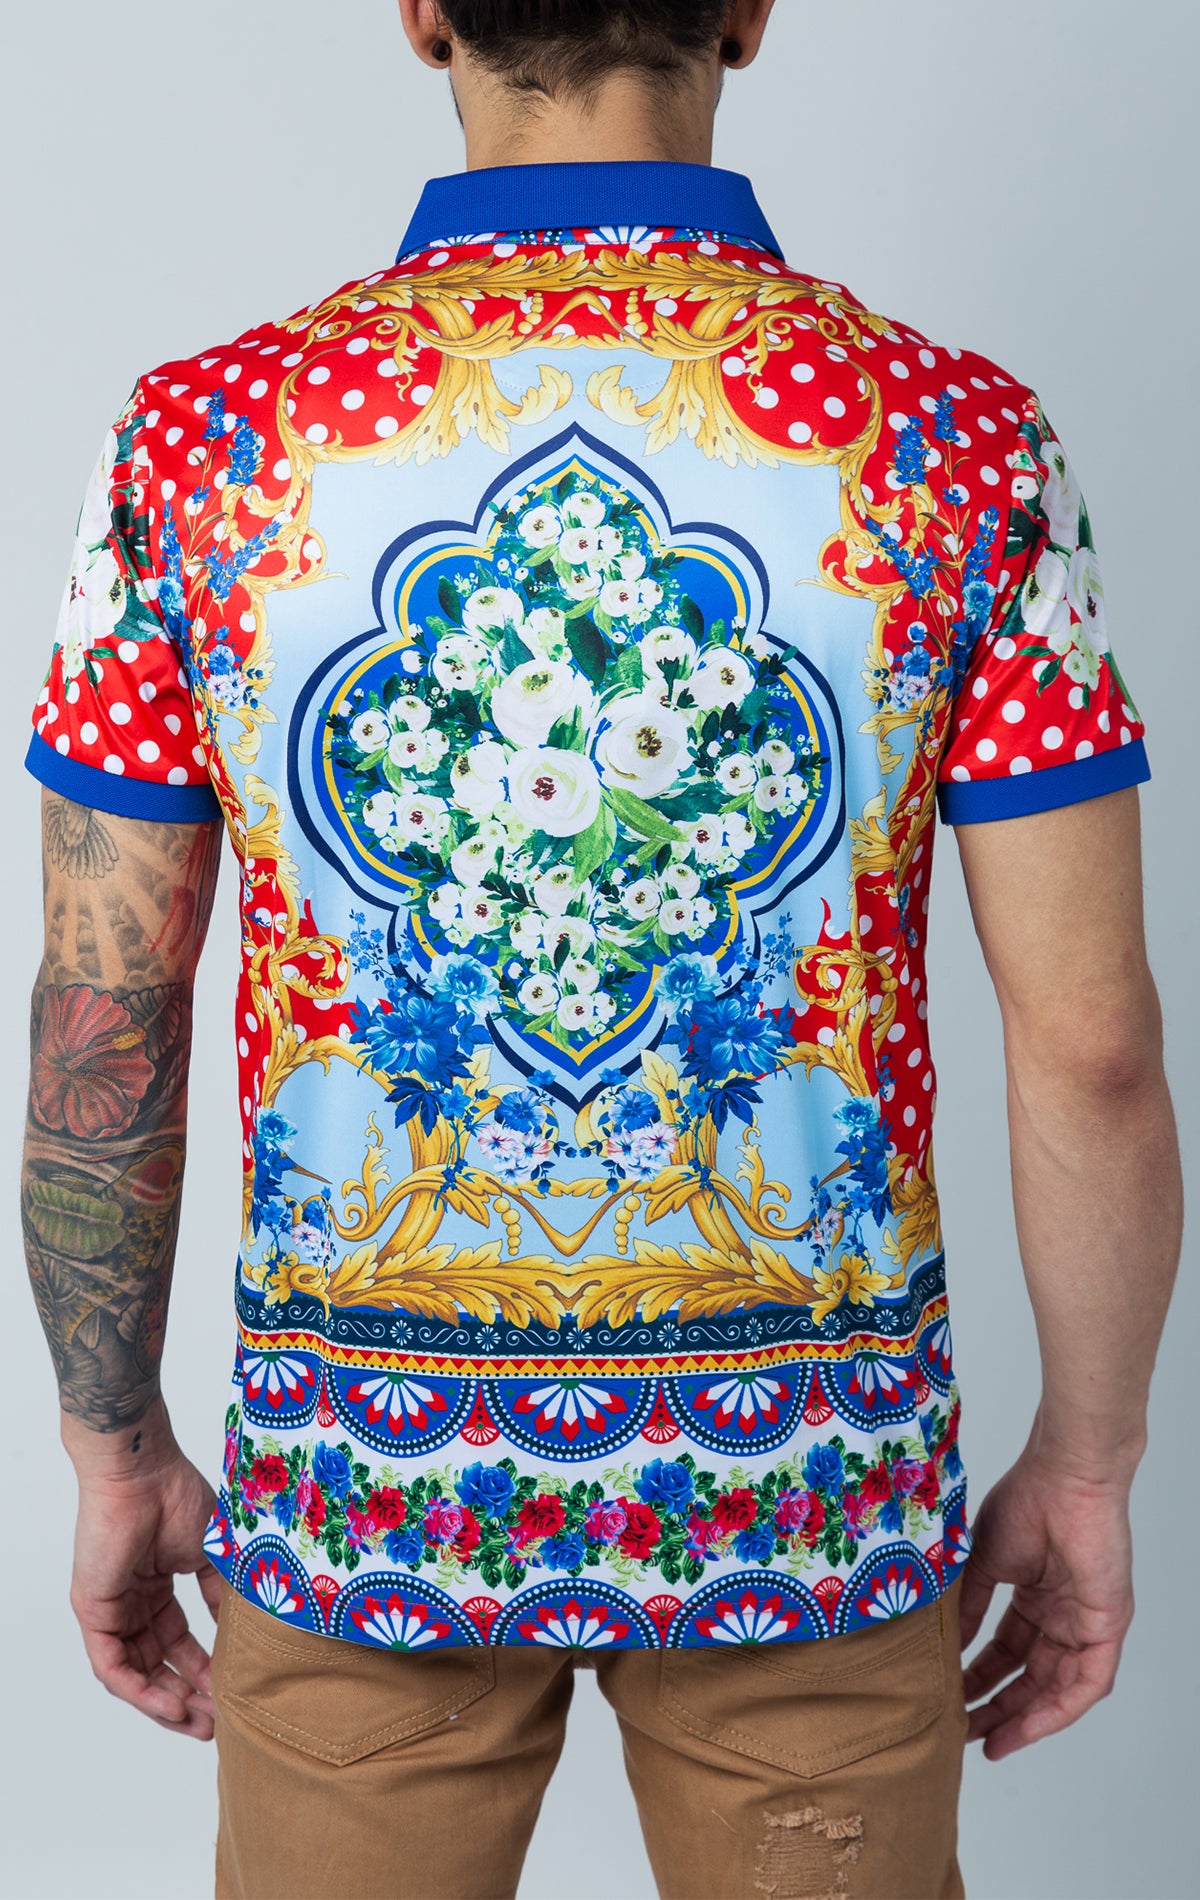 polo shirt adorned with a beautiful floral print